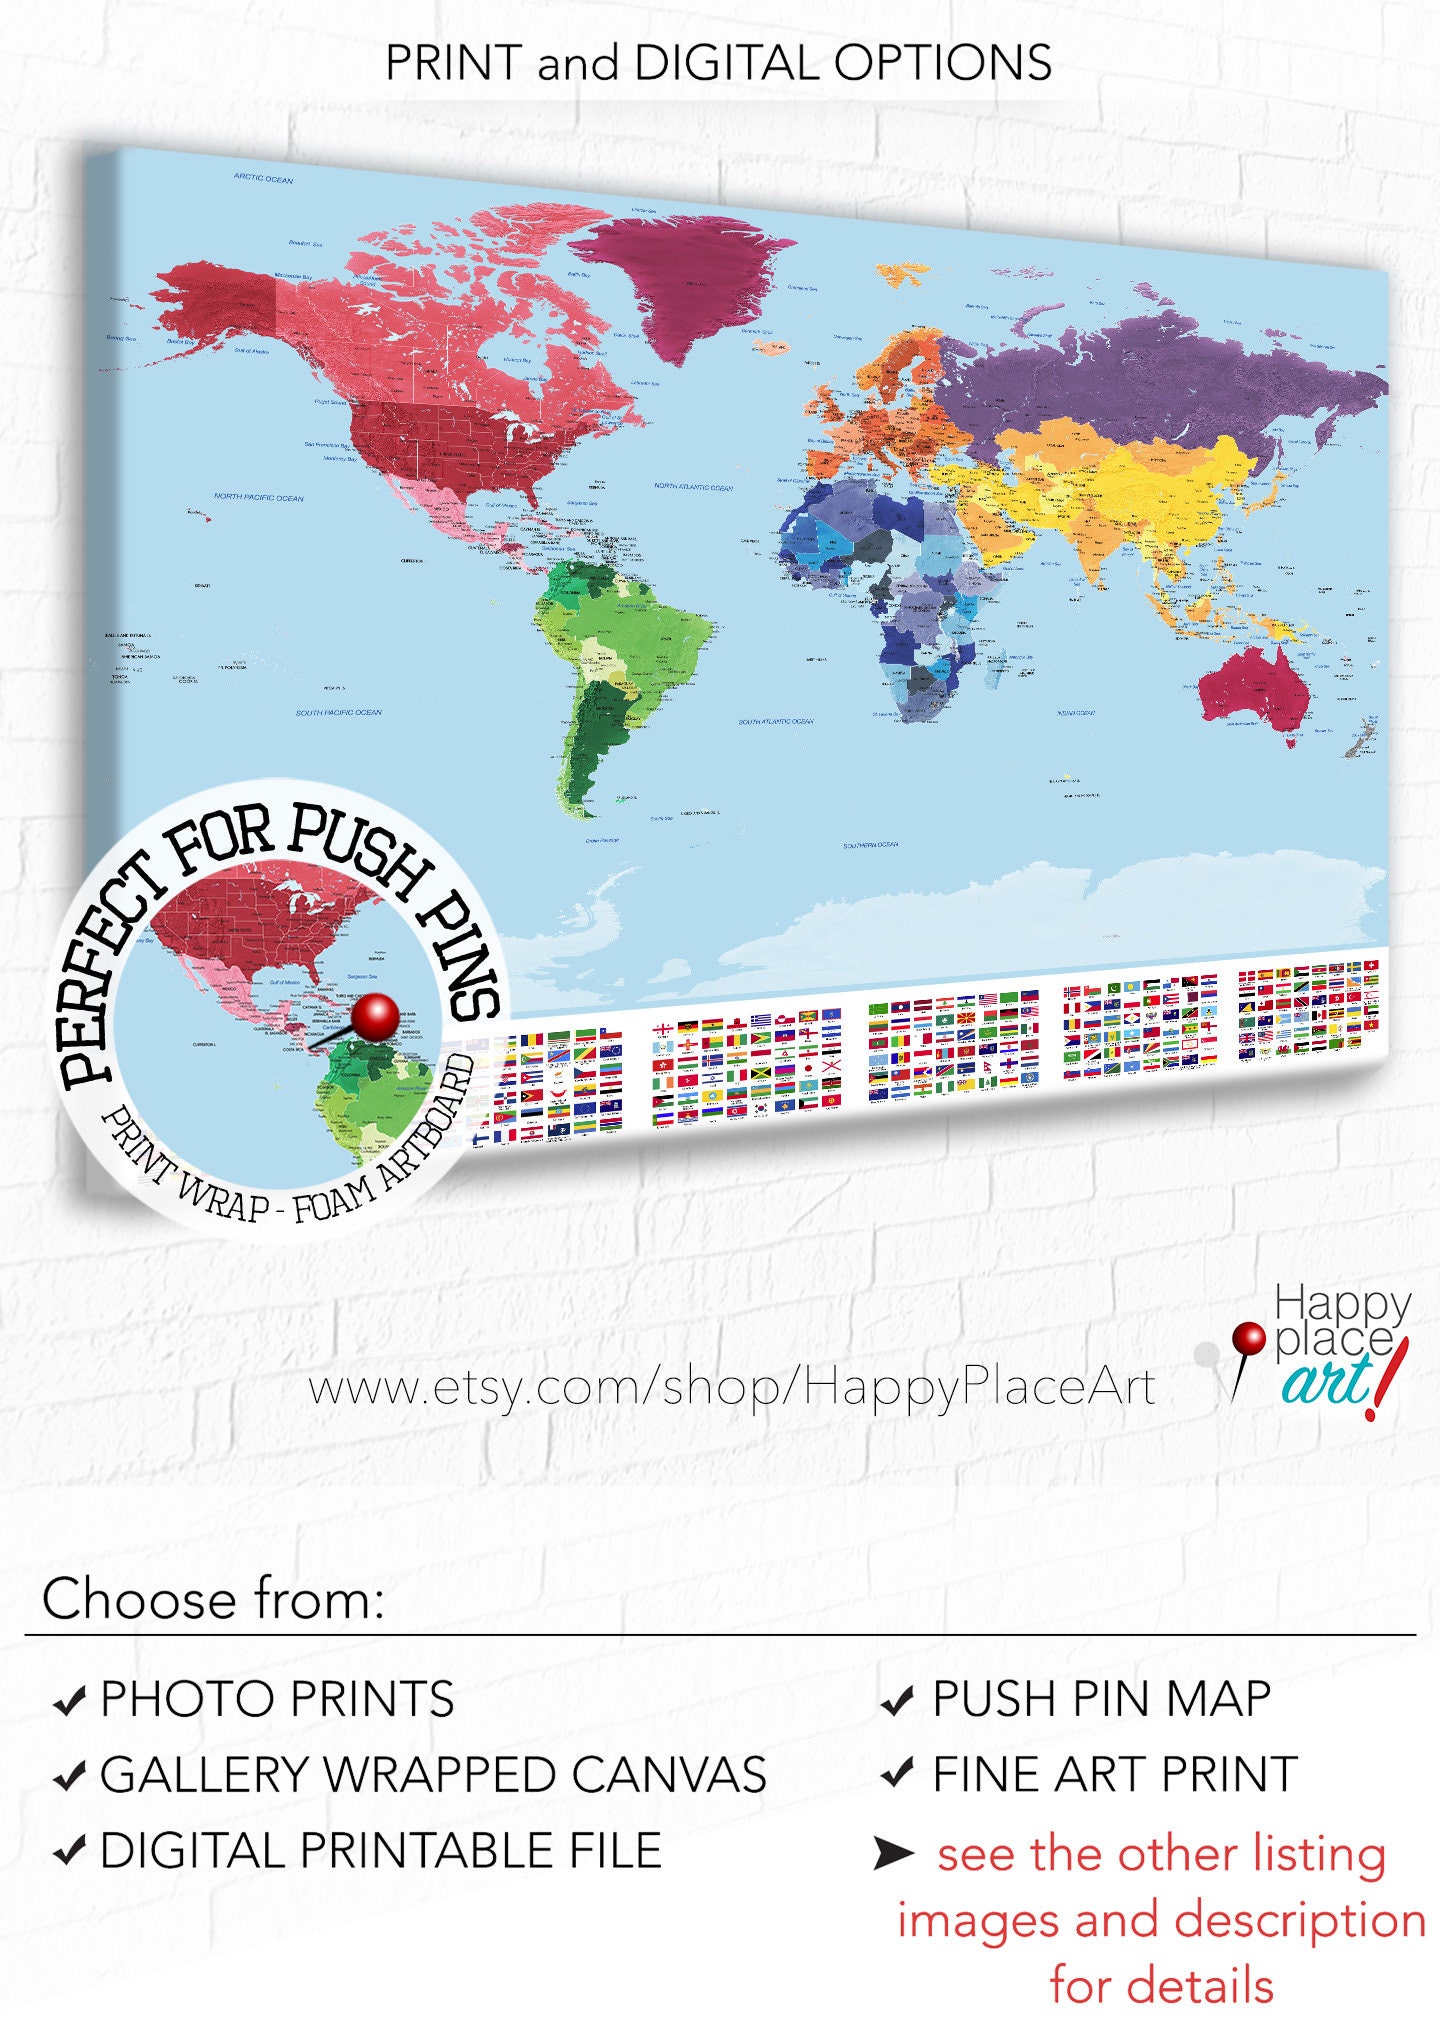 World Push Pin Travel Map on Canvas - Gulf Stream (Select Map Size: 32 x 24 Inches)